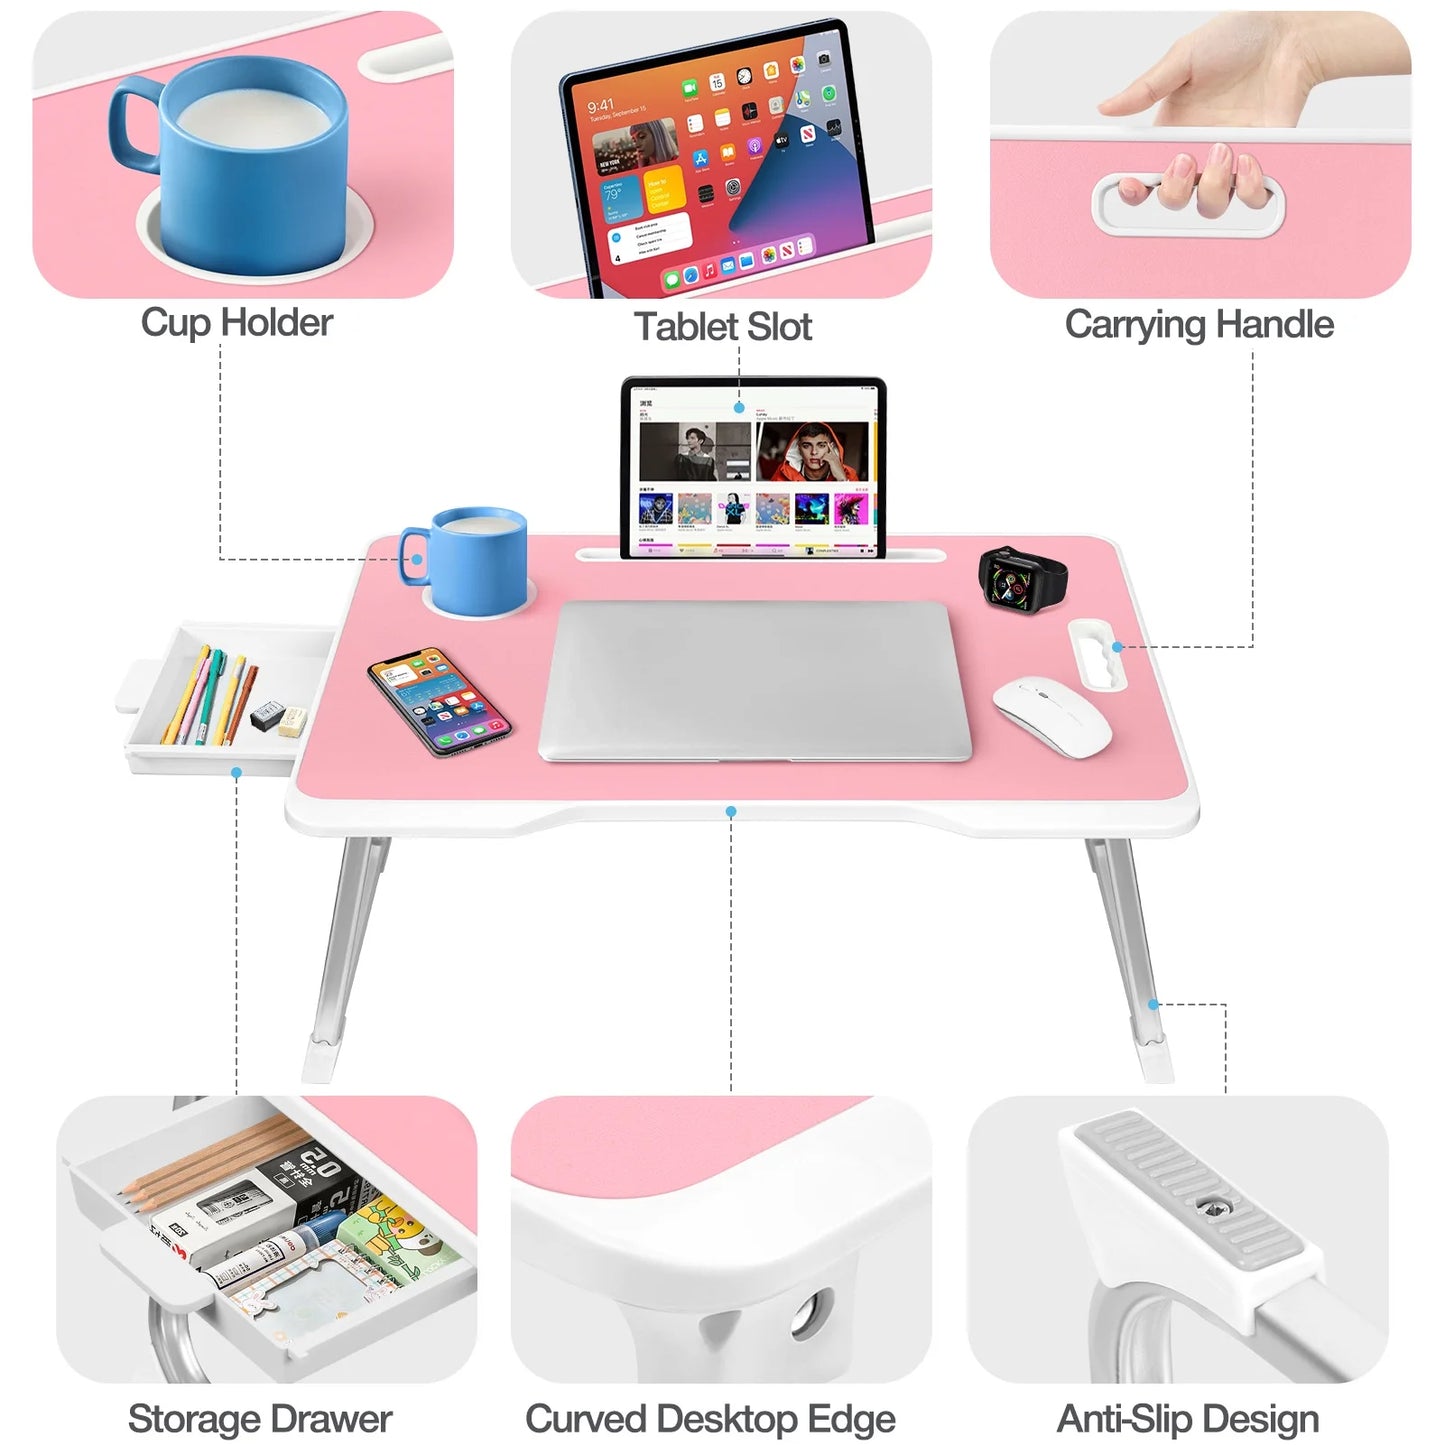 Large Lap Desk for Bed | Laptop Table, Portable Desk, Bed Laptop Desk, Bed Table for Laptop | Floor Table, Floor Desk for Adults (Pink) School Supplies